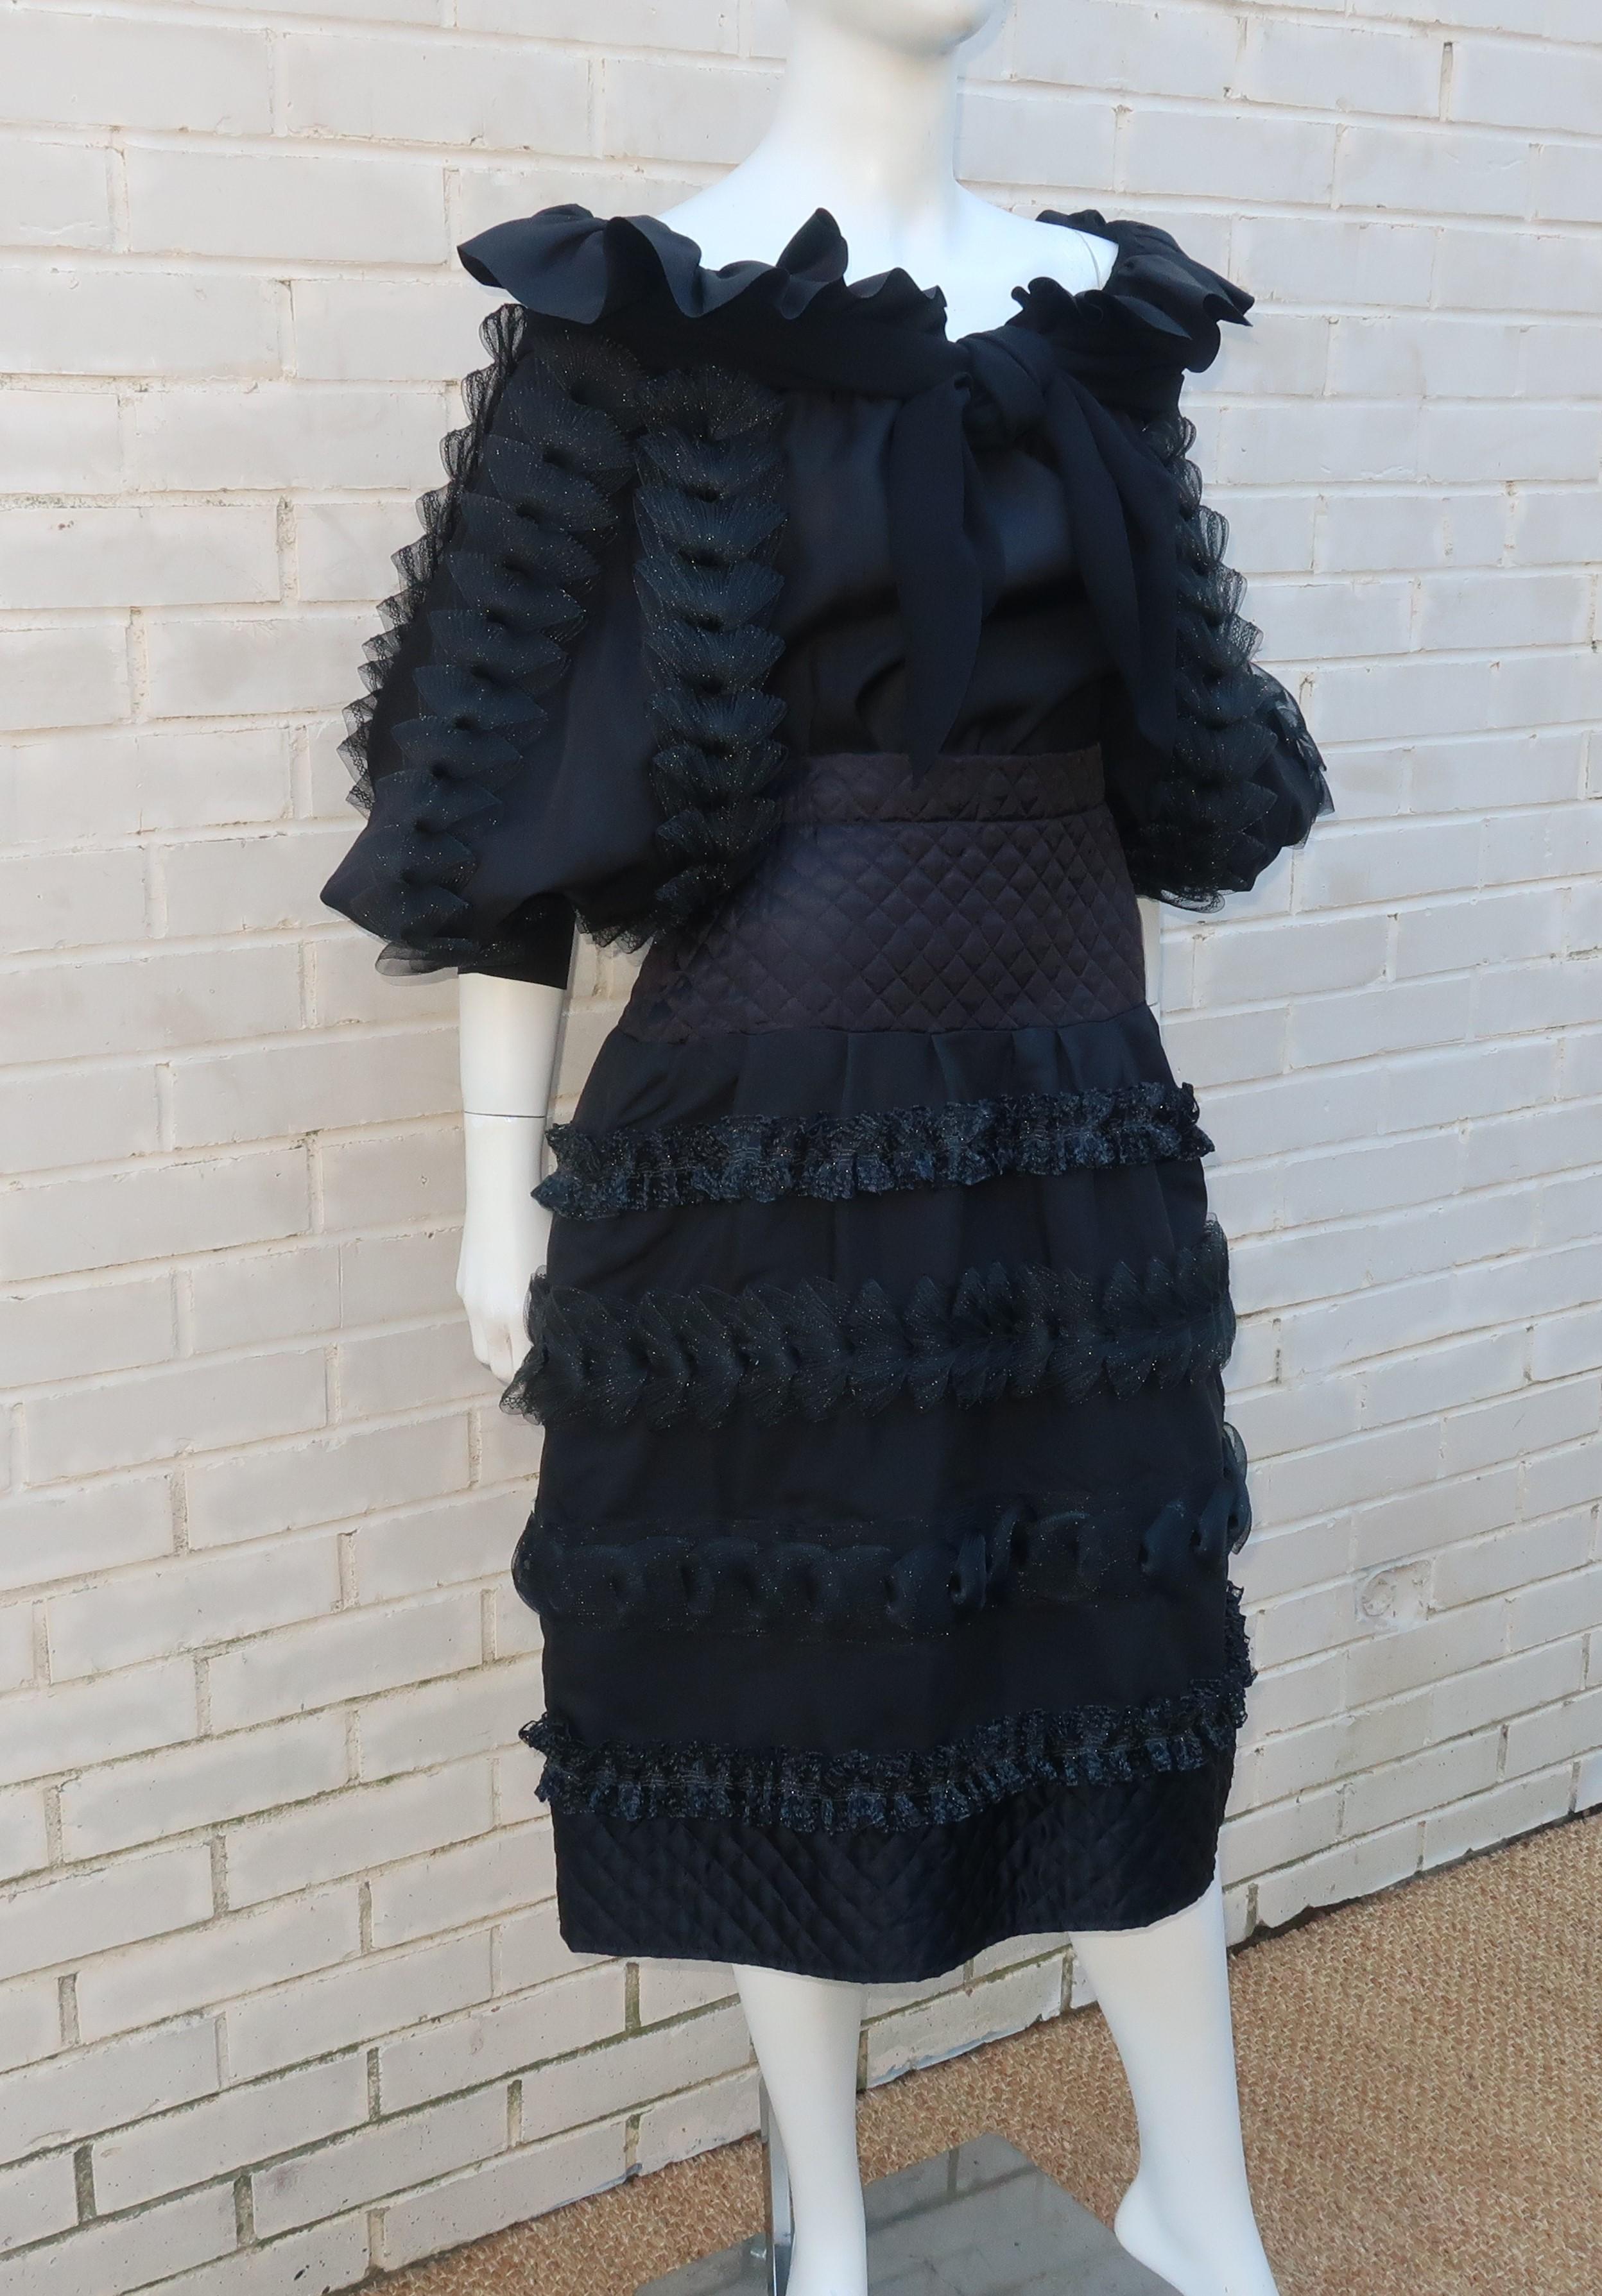 There is a whole lot of 1980's 'fabulousness' going on with this two piece black ruffled dress which consists of an off-the-shoulder blouse and partly quilted skirt.  The blouse is constructed with an elasticized built-in shawl collar (see it untied